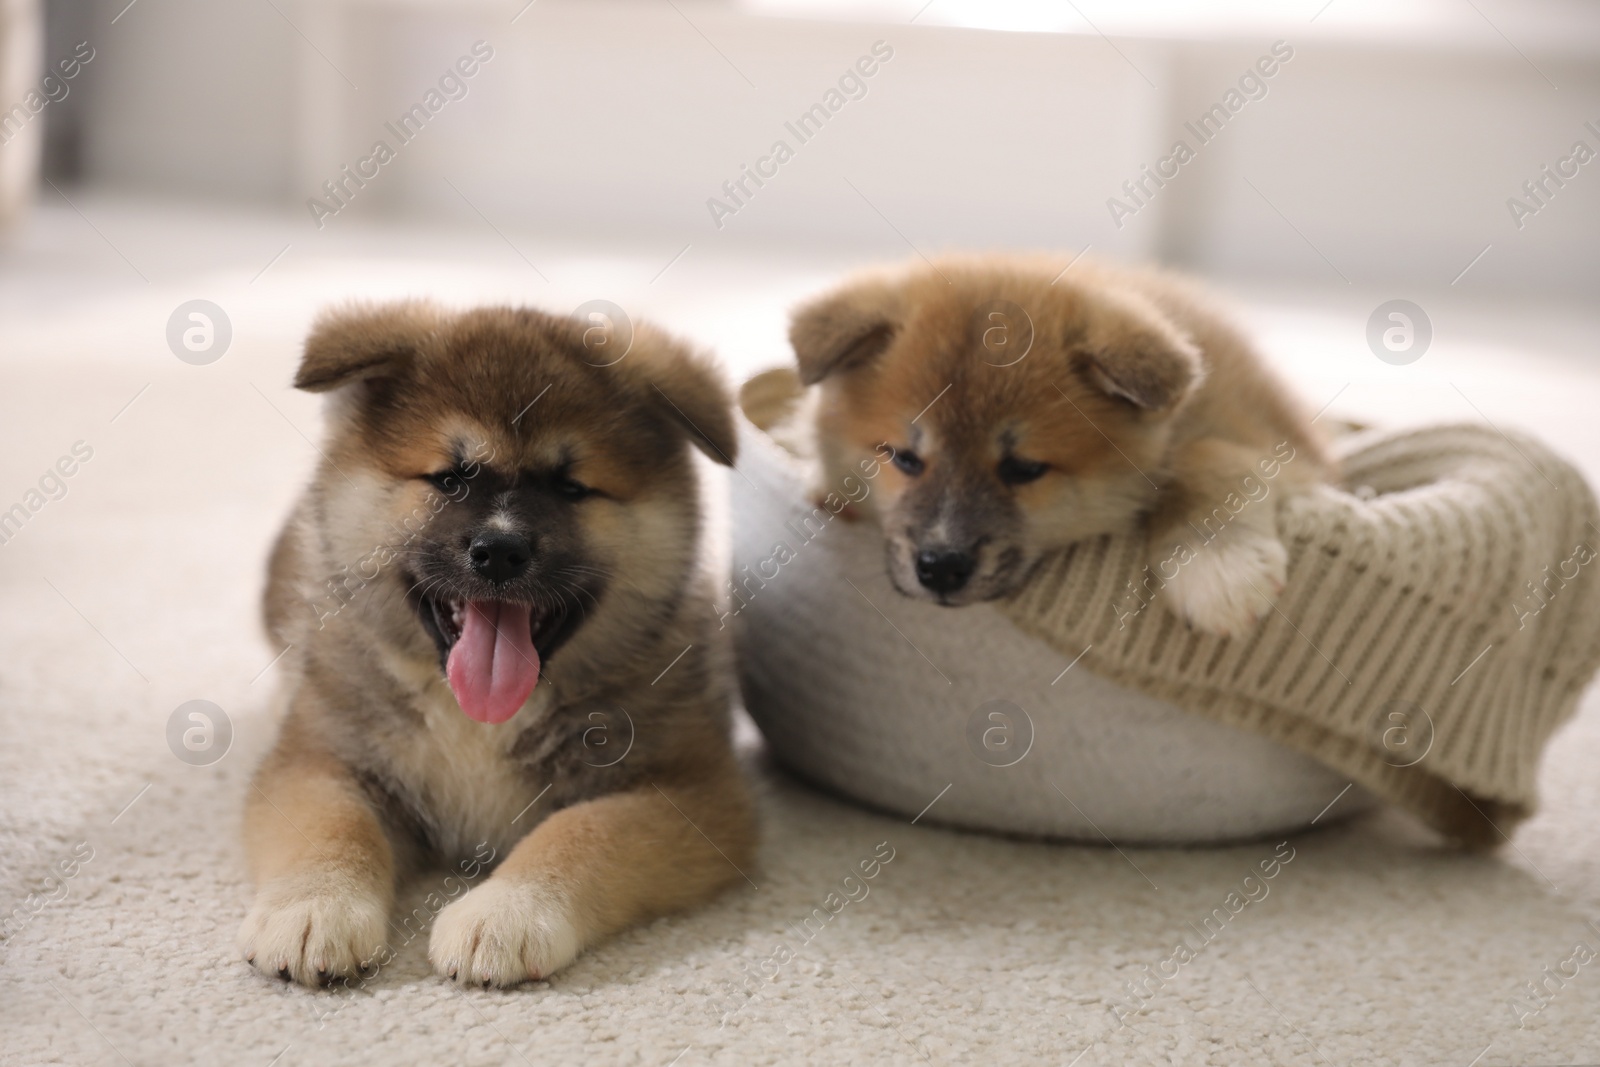 Photo of Adorable Akita Inu puppies on carpet indoors